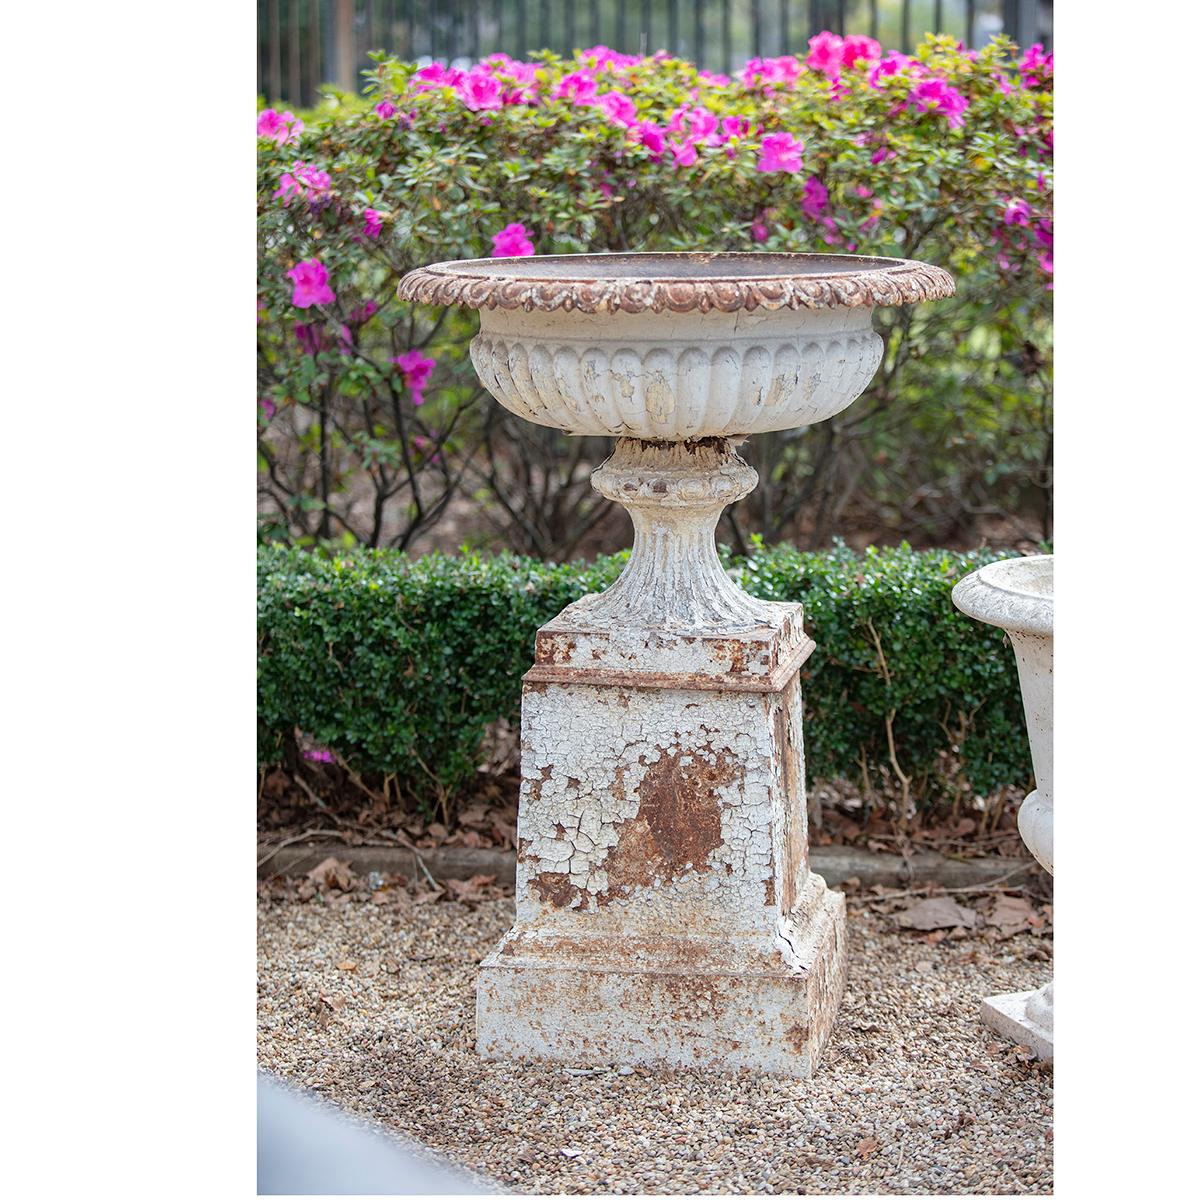 Pair of grand cast iron garden urns atop original cast iron bases in traditional English style. The urns are beautifully decorated and have a great patina – missing paint throughout and rust add to the wonderful finish. Make a statement with these